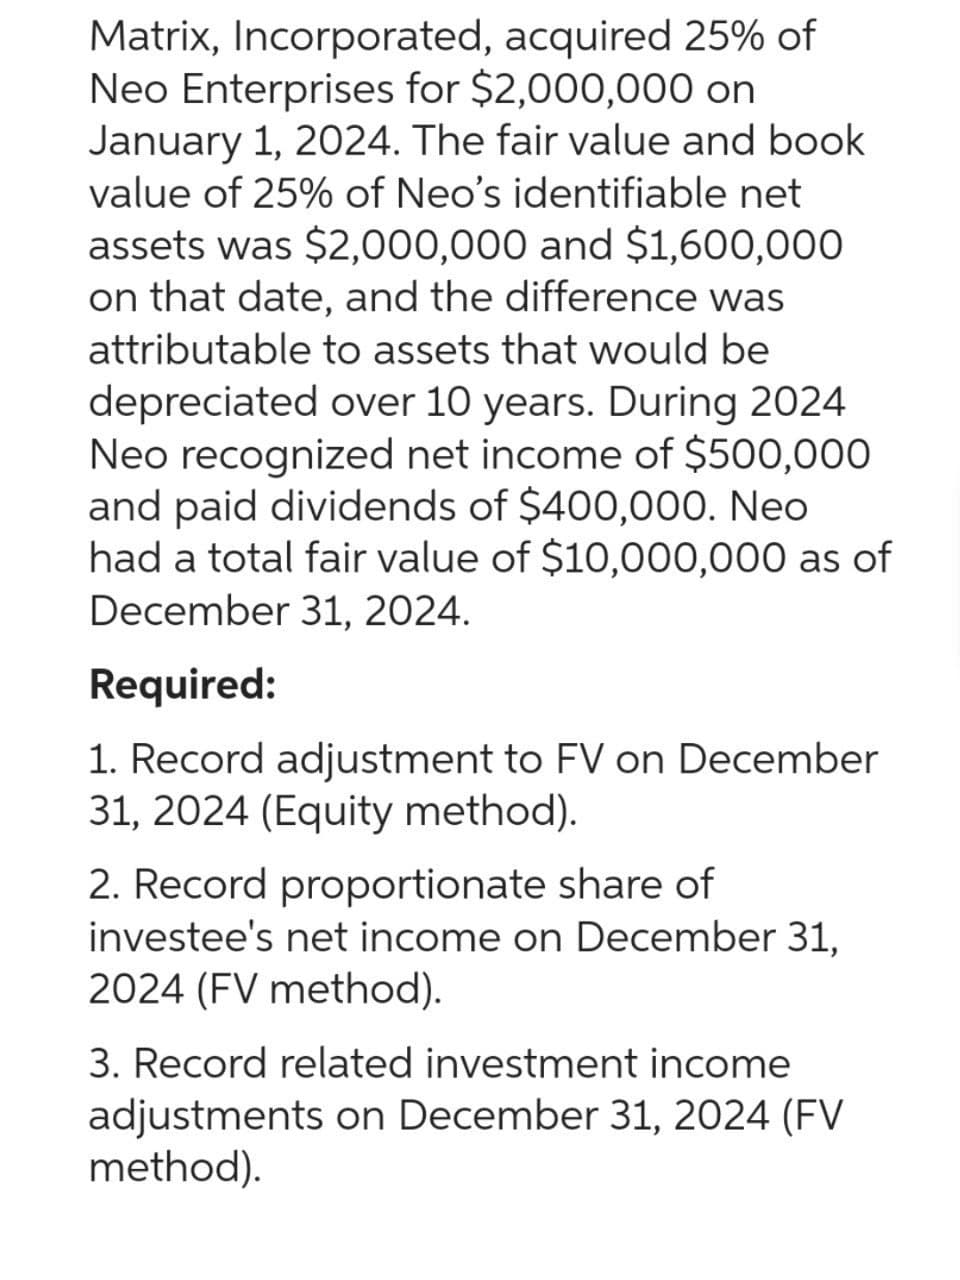 Matrix, Incorporated, acquired 25% of
Neo Enterprises for $2,000,000 on
January 1, 2024. The fair value and book
value of 25% of Neo's identifiable net
assets was $2,000,000 and $1,600,000
on that date, and the difference was
attributable to assets that would be
depreciated over 10 years. During 2024
Neo recognized net income of $500,000
and paid dividends of $400,000. Neo
had a total fair value of $10,000,000 as of
December 31, 2024.
Required:
1. Record adjustment to FV on December
31, 2024 (Equity method).
2. Record proportionate share of
investee's net income on December 31,
2024 (FV method).
3. Record related investment income
adjustments on December 31, 2024 (FV
method).